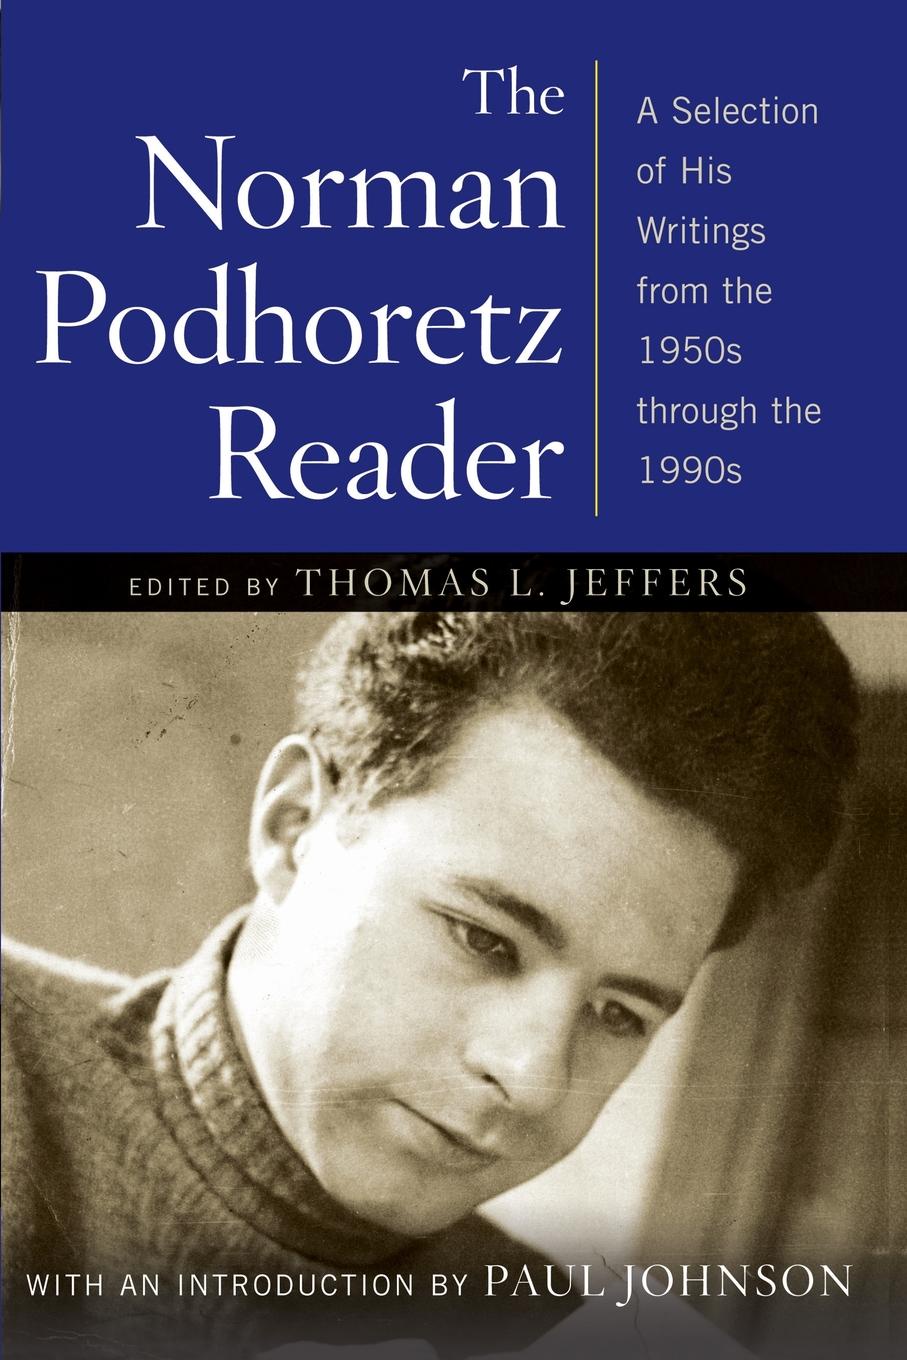 Norman Podhoretz Reader. A Selection of His Writings from the 1950s Through the 1990s (Revised)